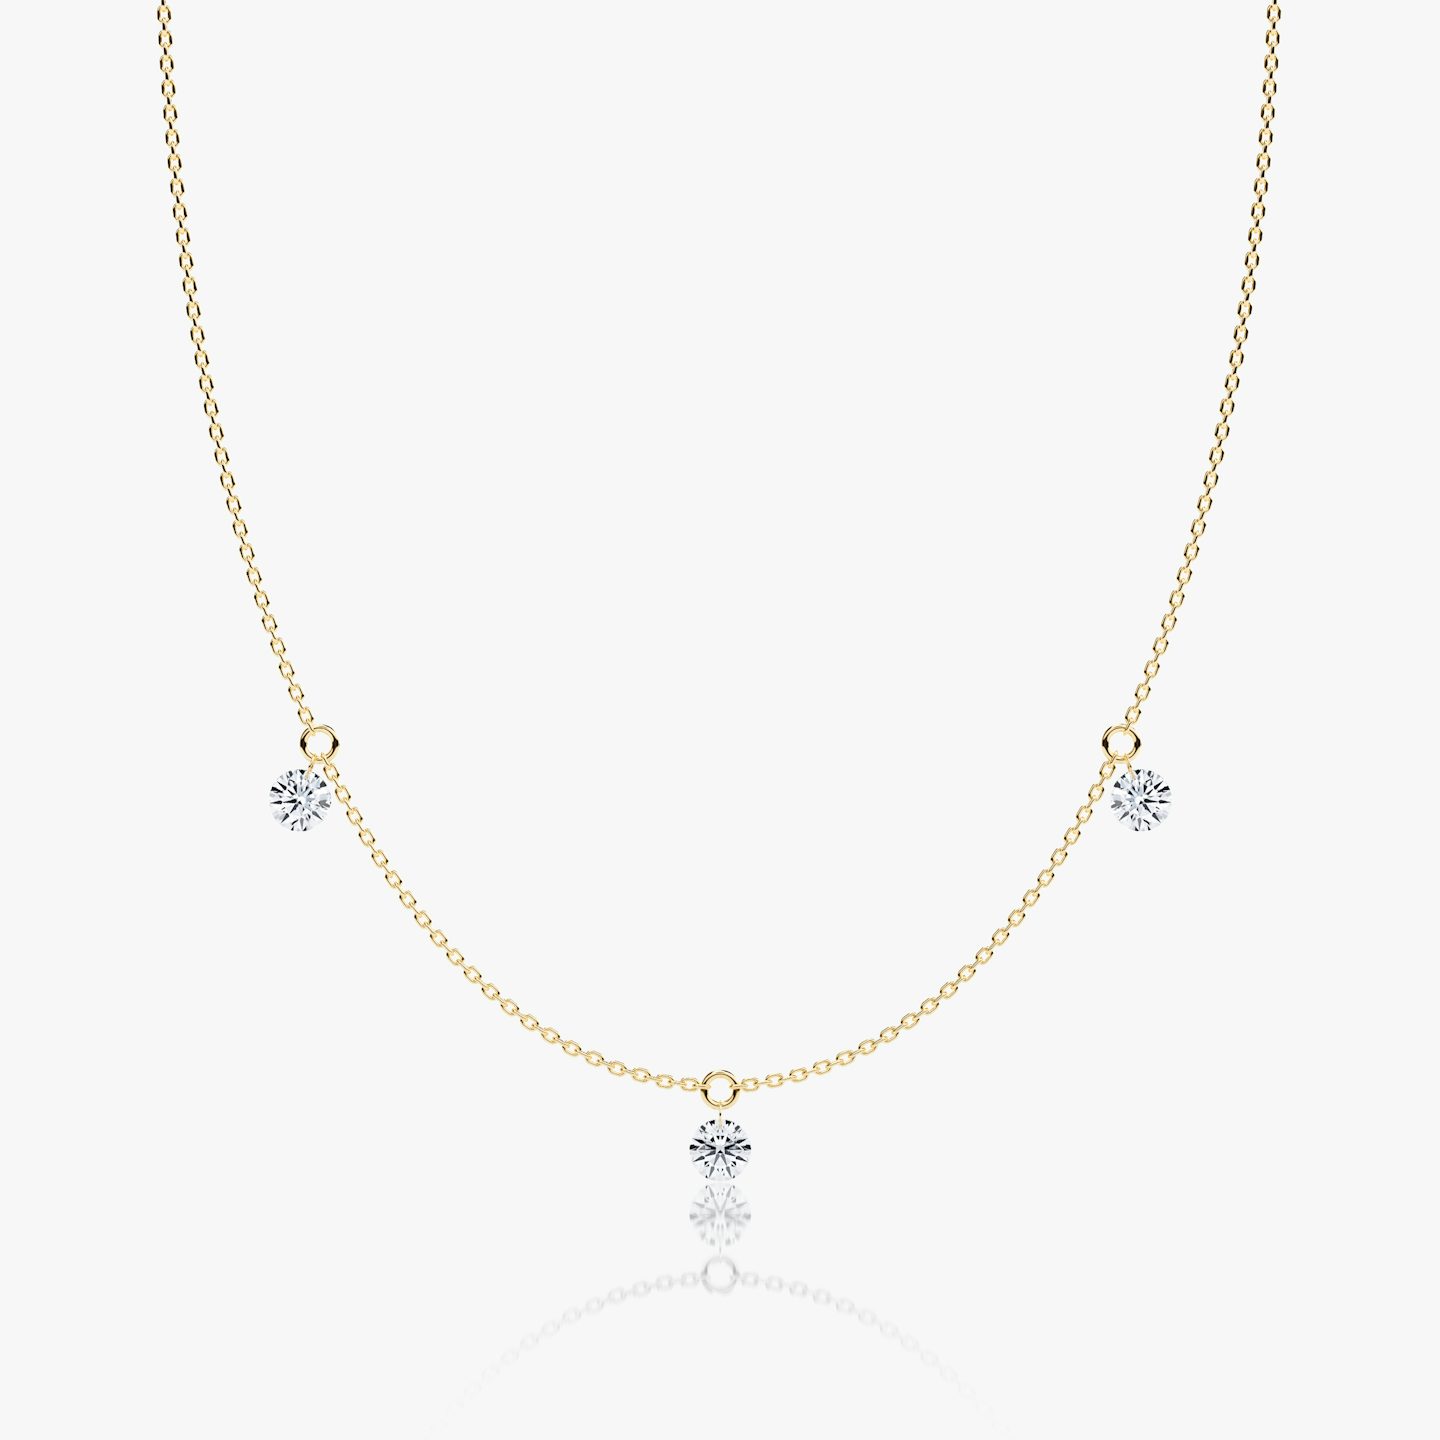 Floating Station Necklace | round-brilliant | 14k | yellow-gold | diamondCount: 3 | chainLength: 16-18